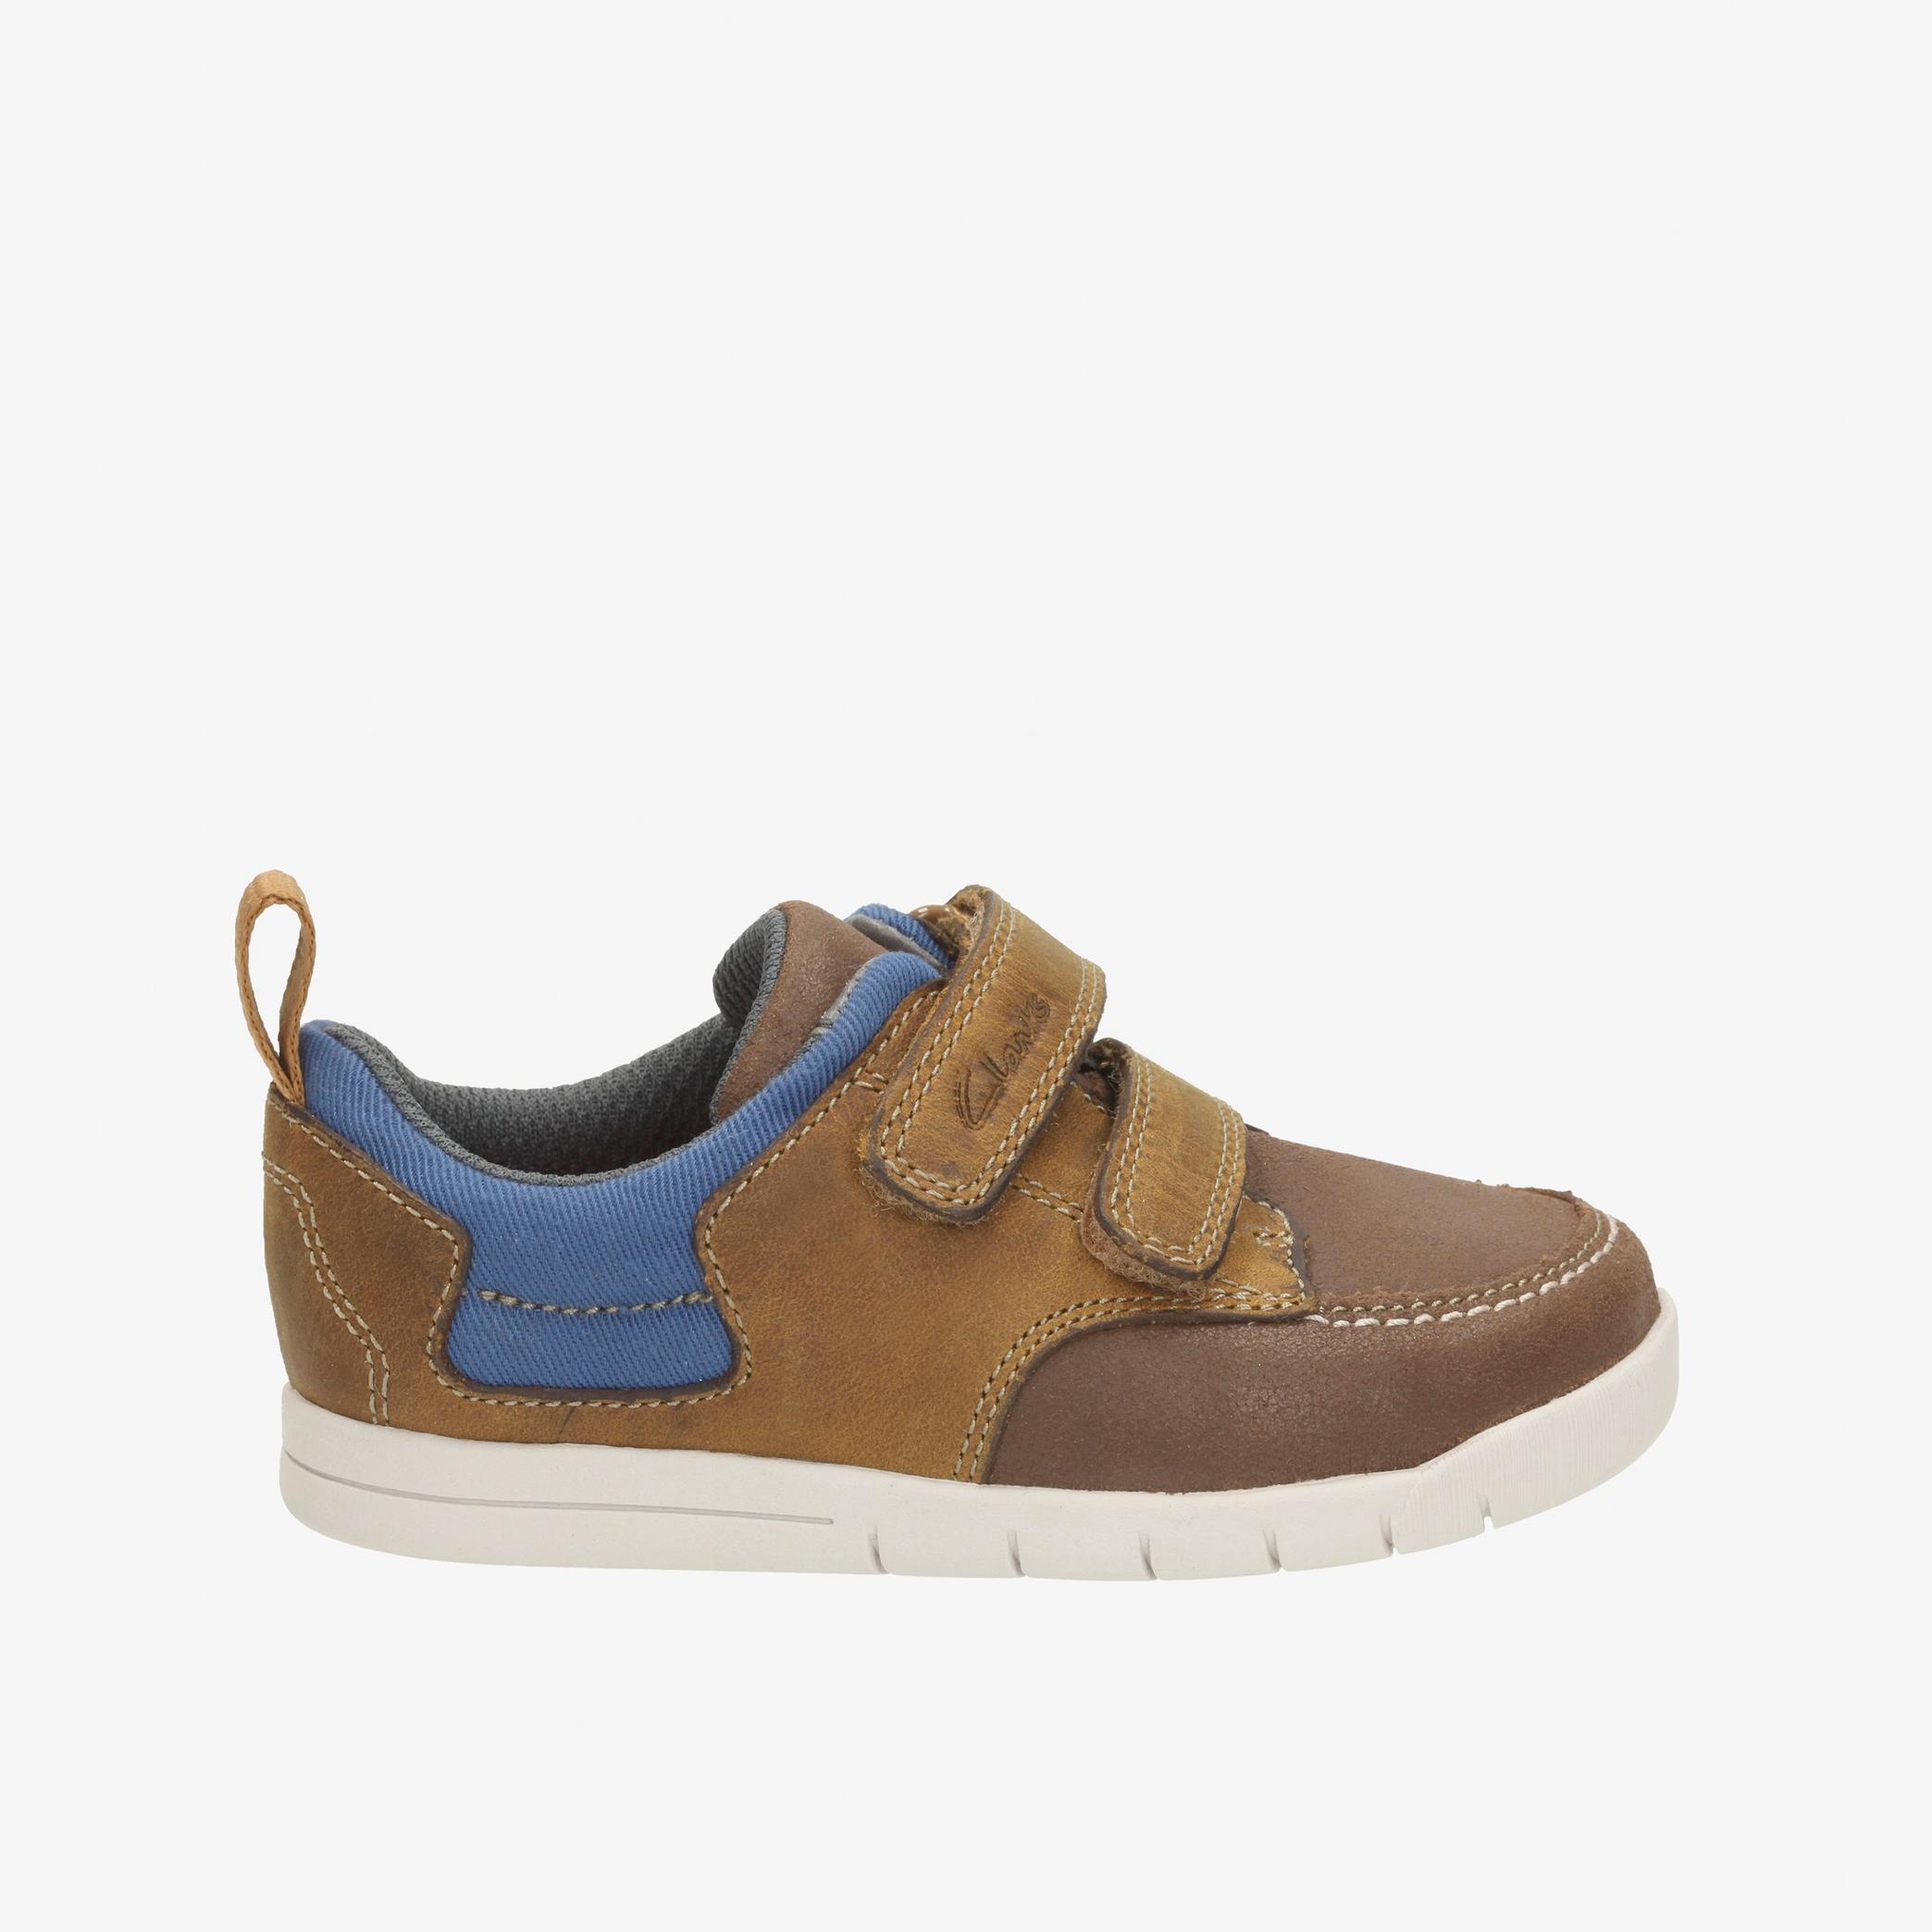 Crazy Jay Toddler Tan Leather Shoes, view 1 of 5